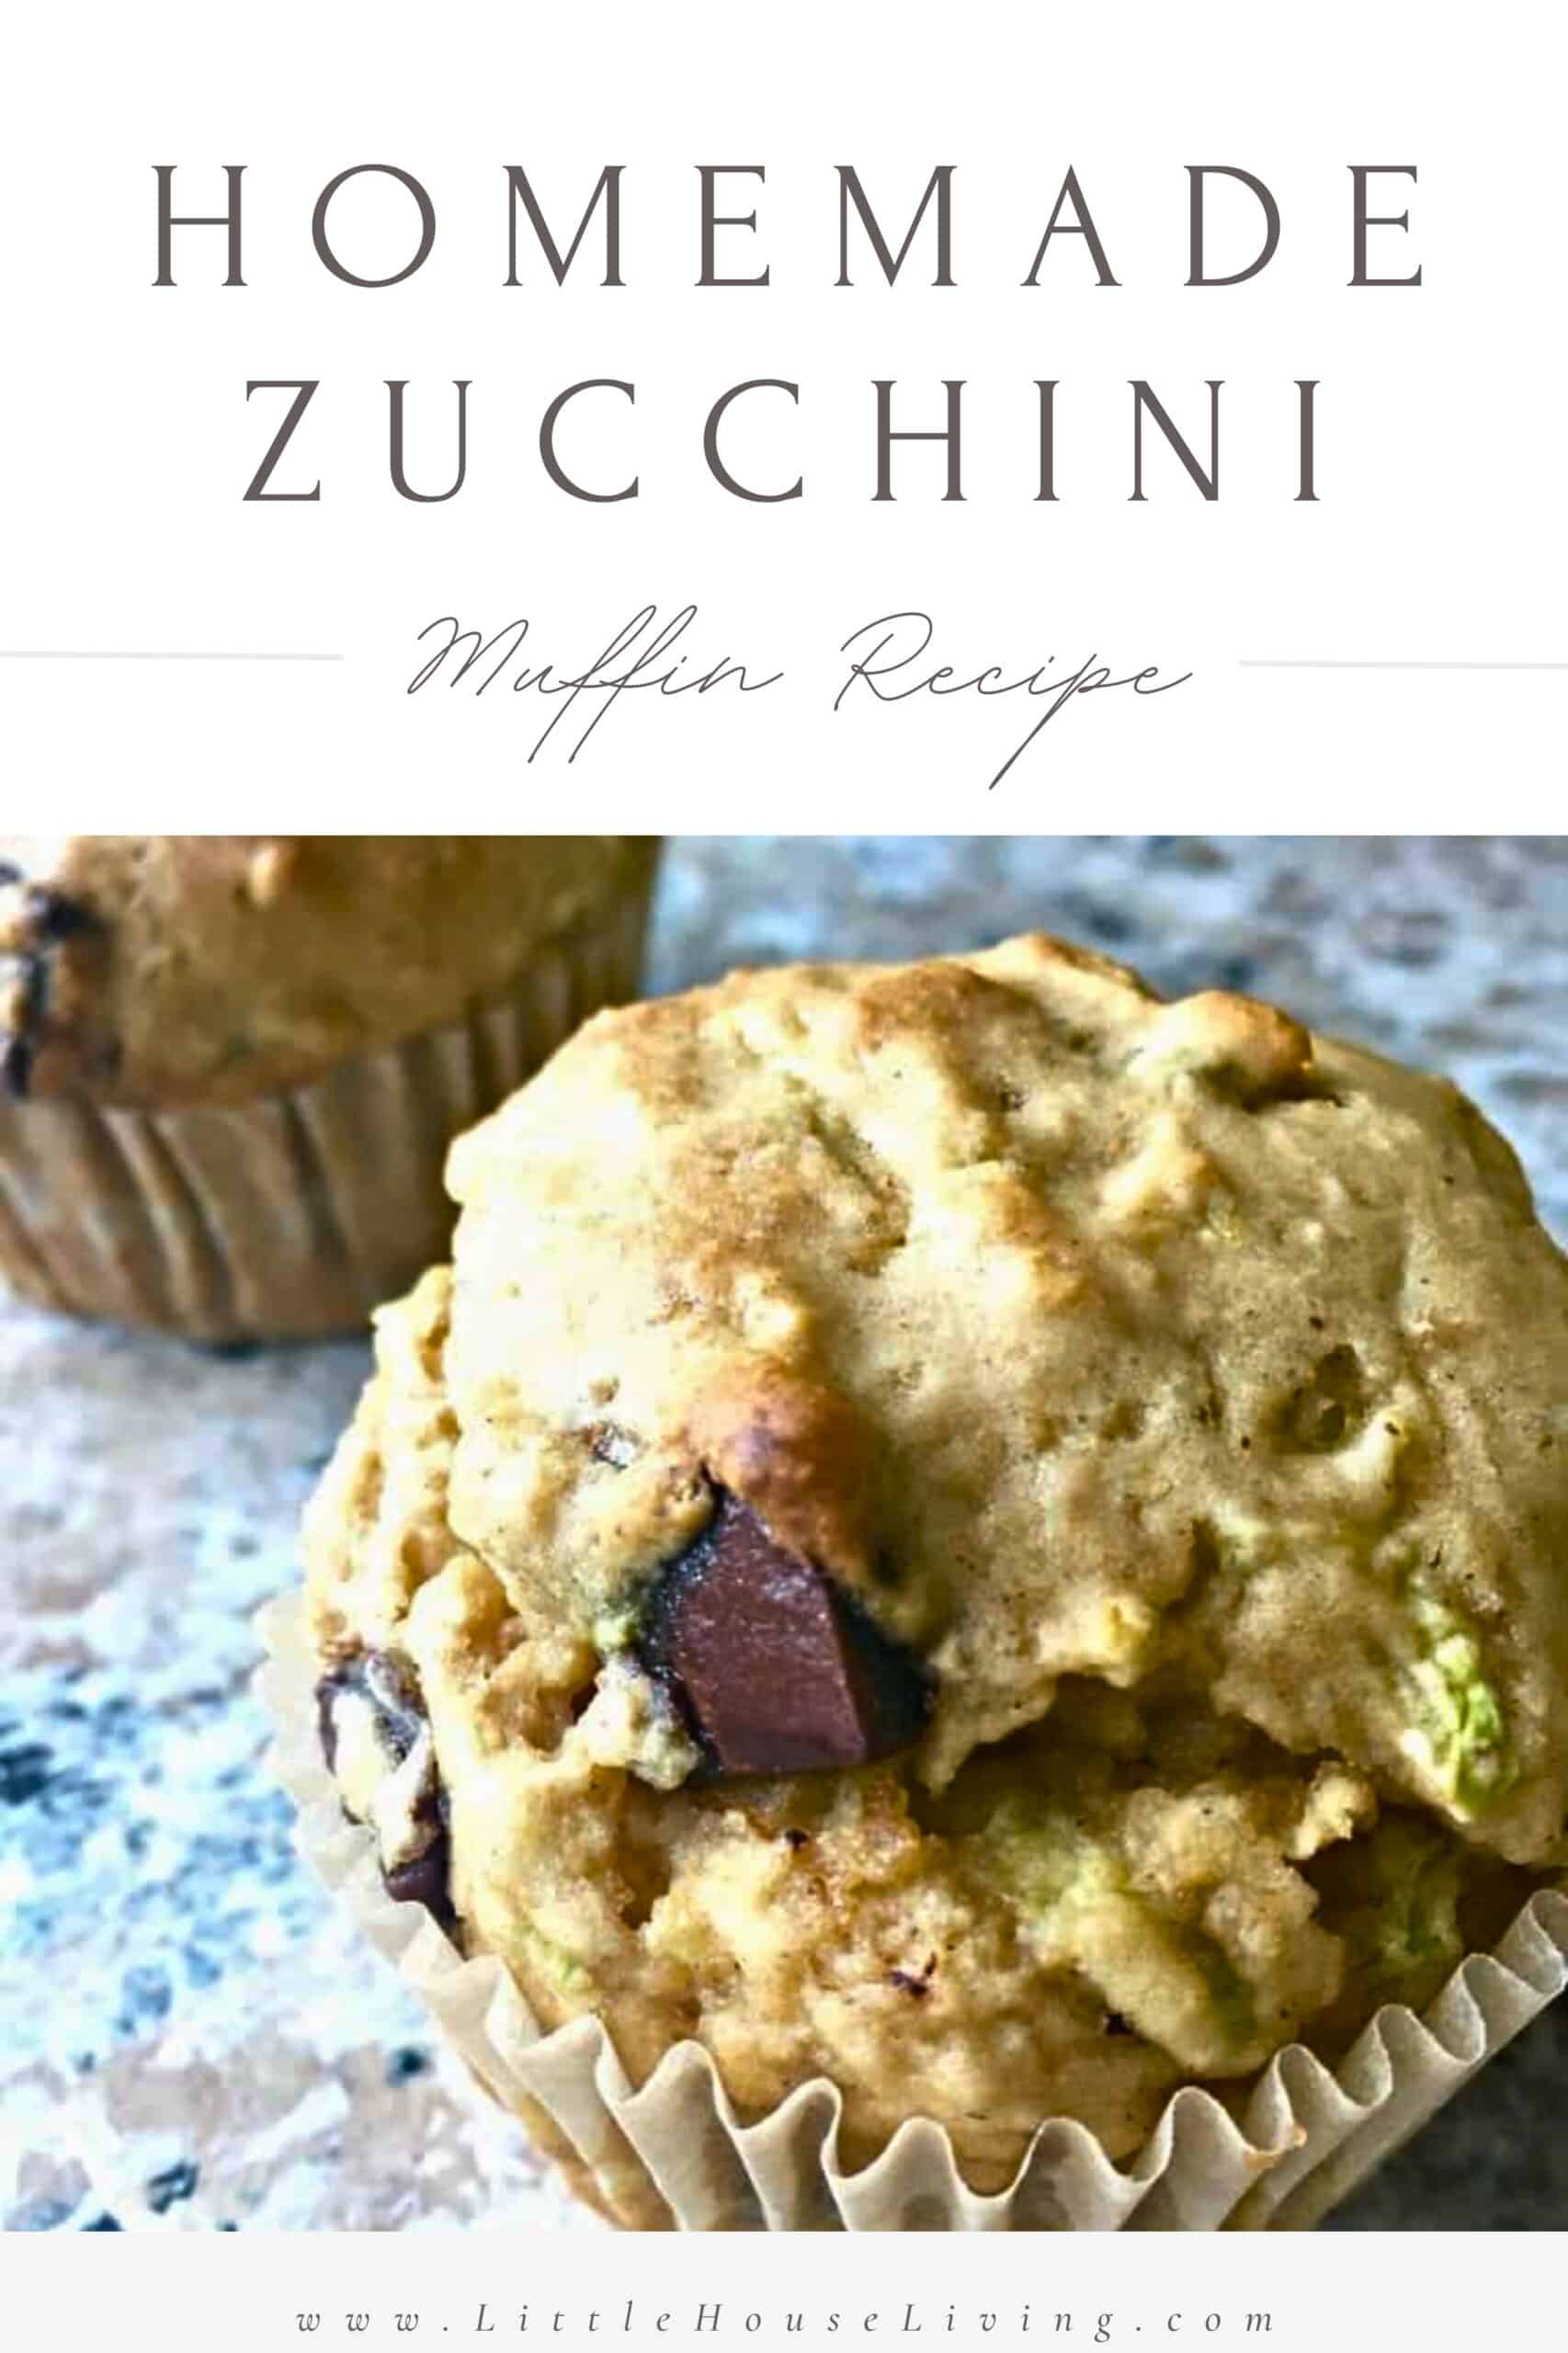 Looking for a tasty way to use all of your garden zucchini? The Best Zucchini Muffin recipe is so easy to make, your family will love it!